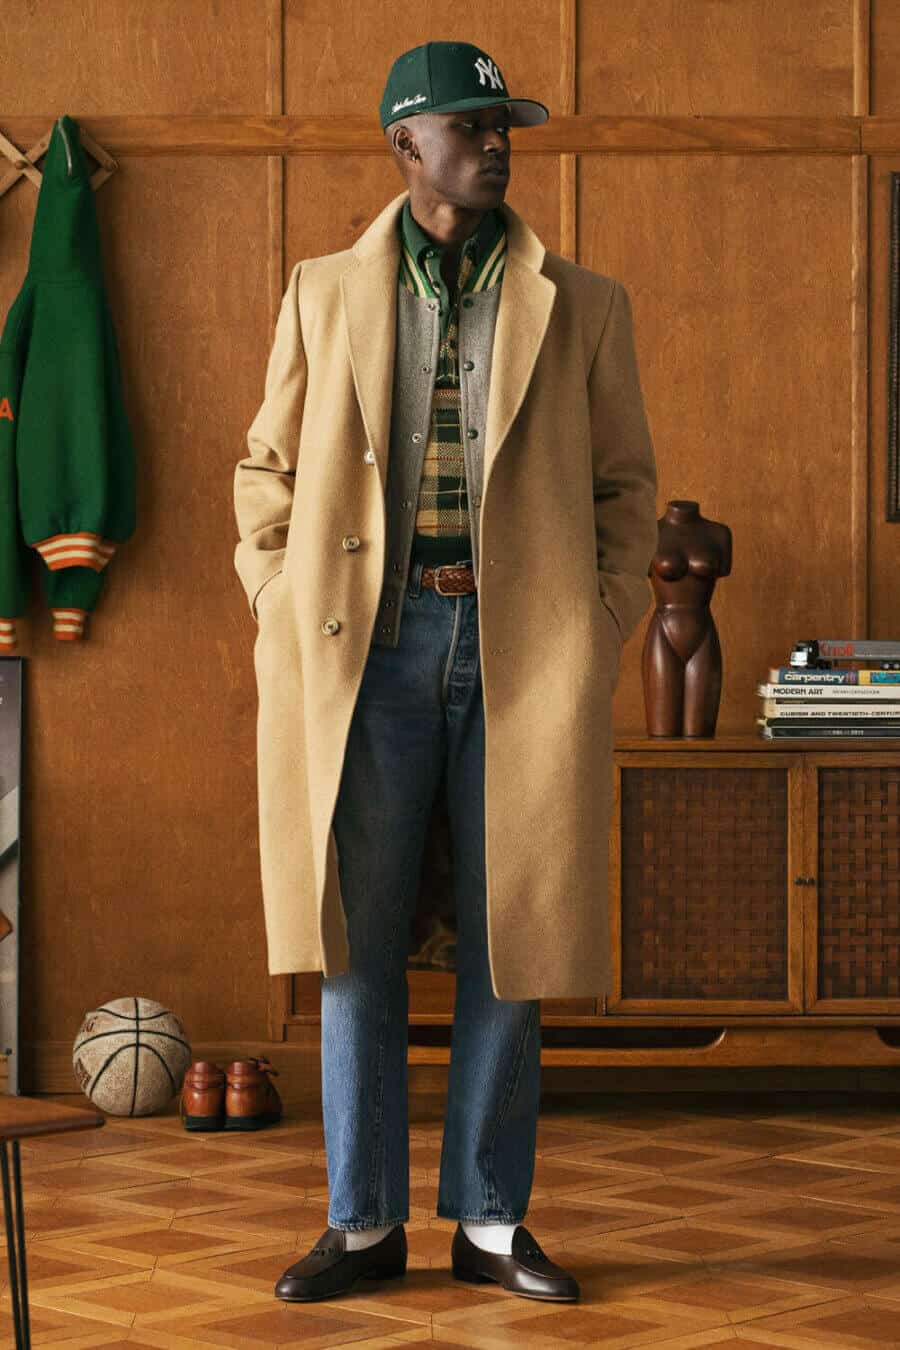 Men's preppy outfit with polo shirt, varsity jacket, overcoat and light wash jeans with loafers